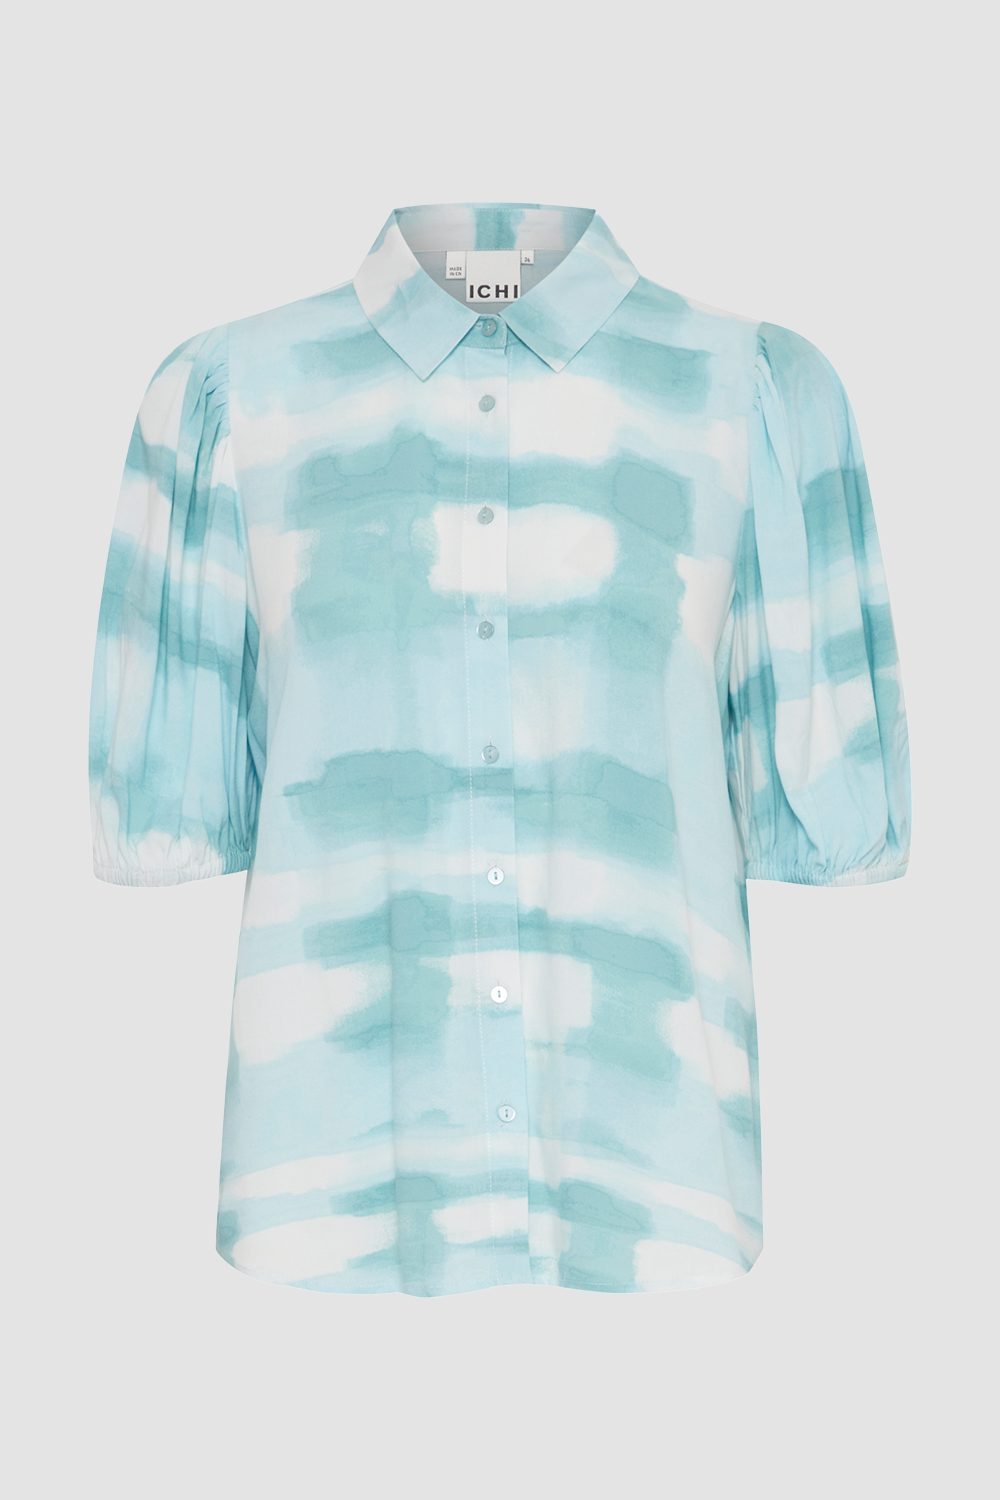 Vianca Shirt in Nile Blue Graphic